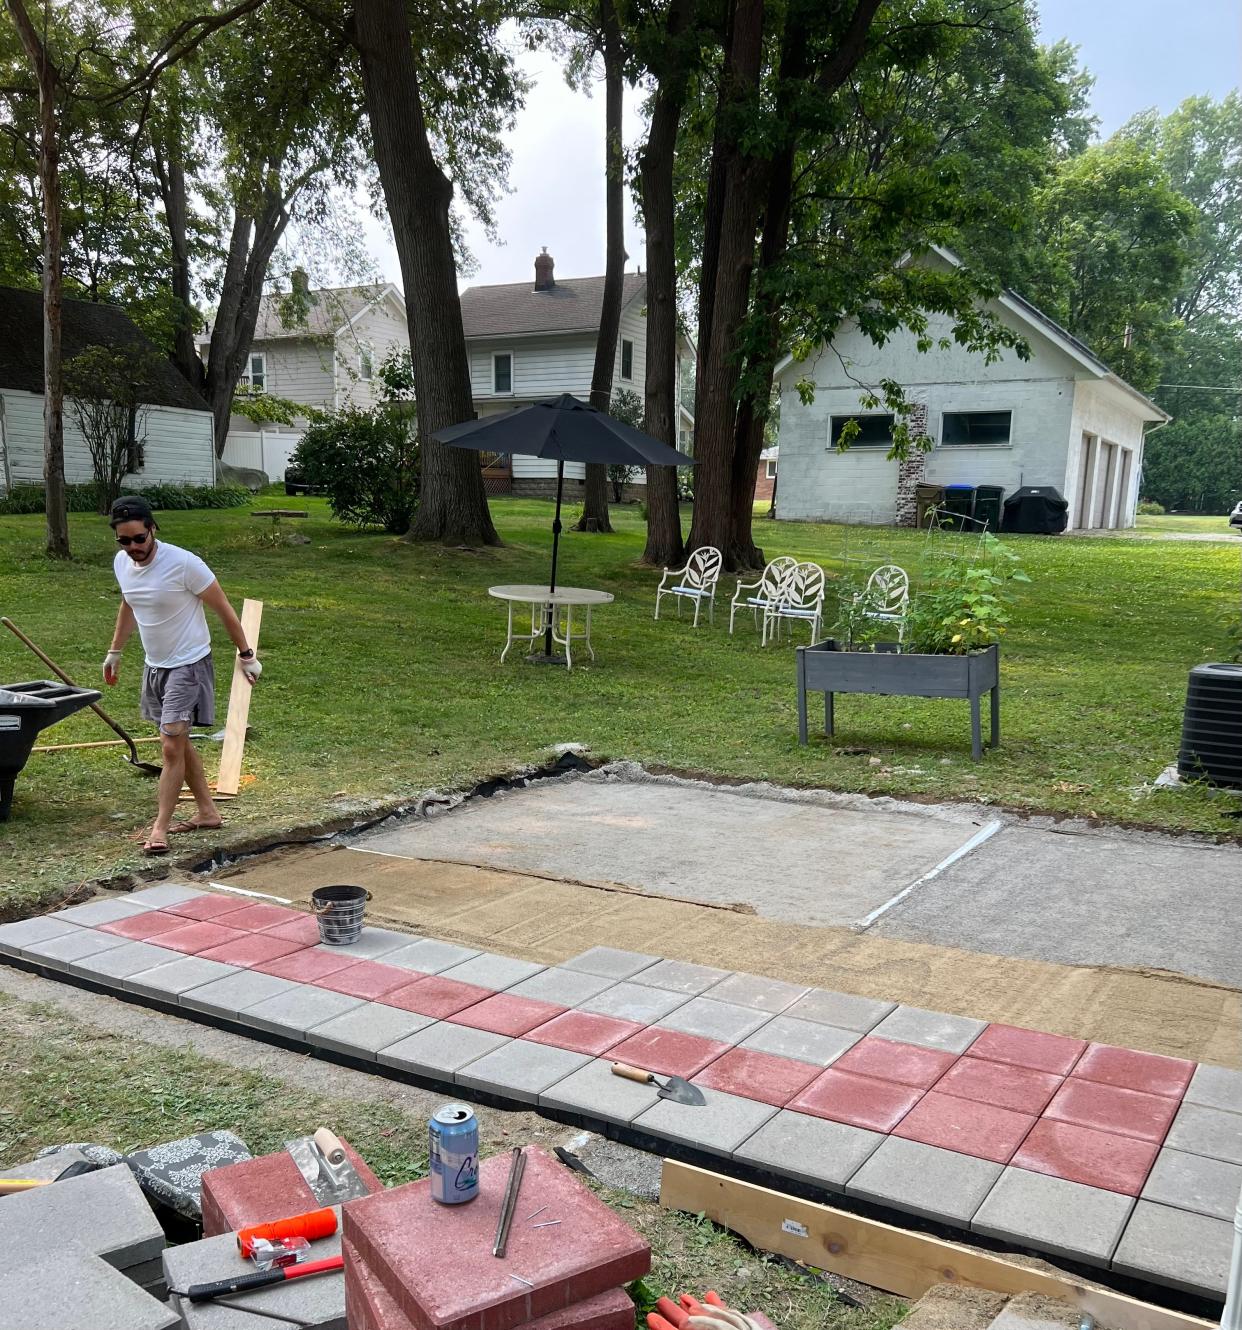 Aaron Bennett works on screeding the sand while Tess lays down pavers.